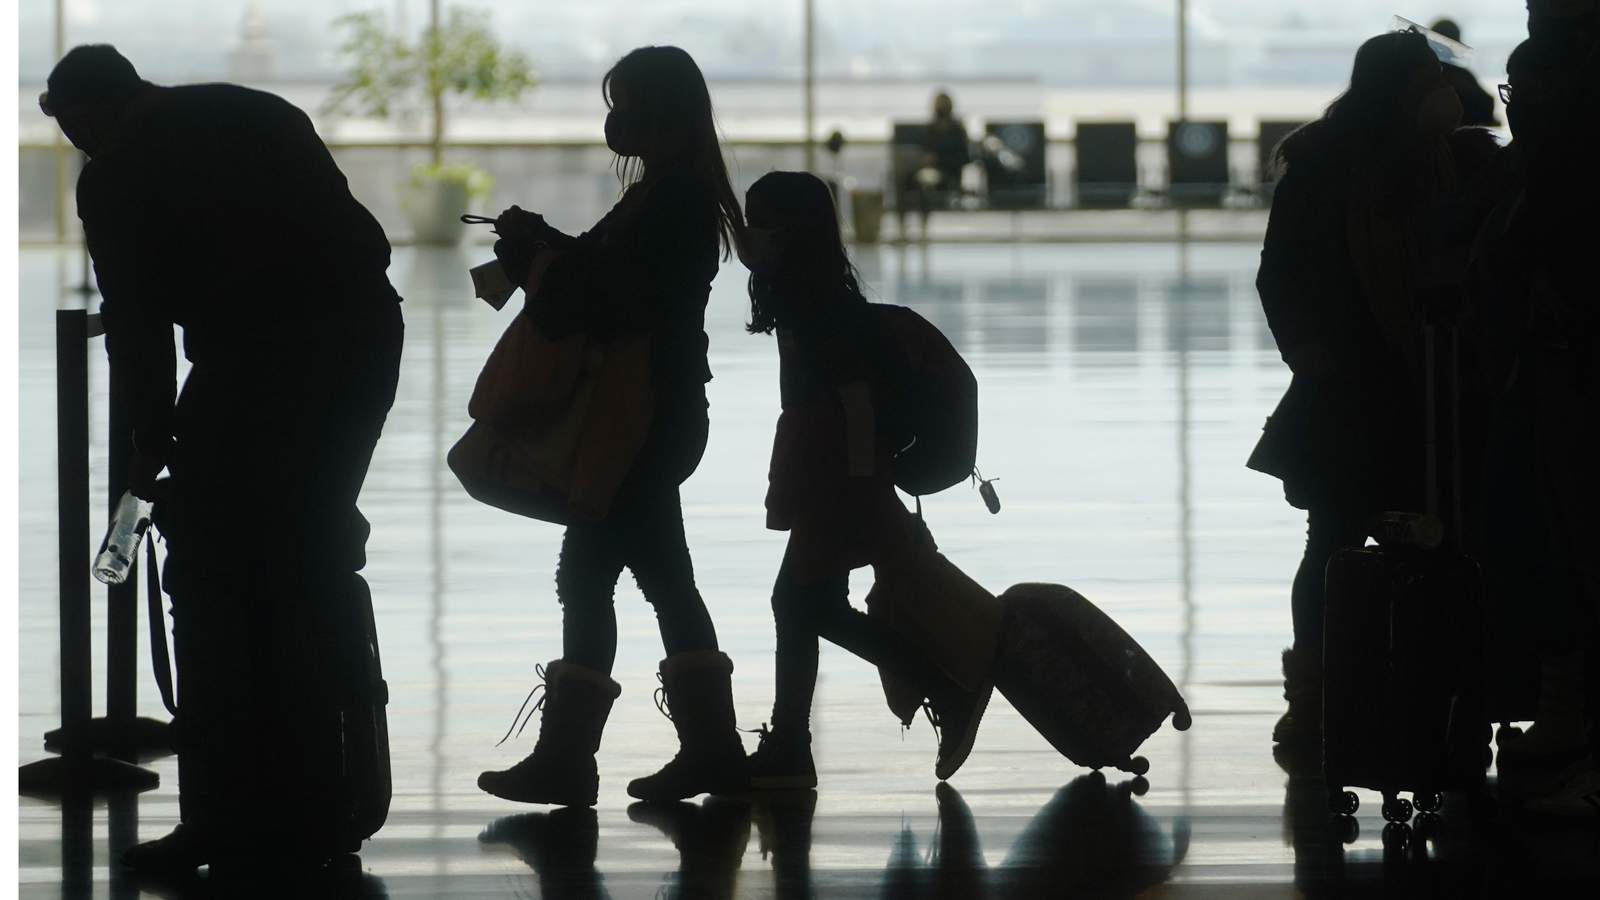 Fully vaccinated people can travel safely again, CDC says